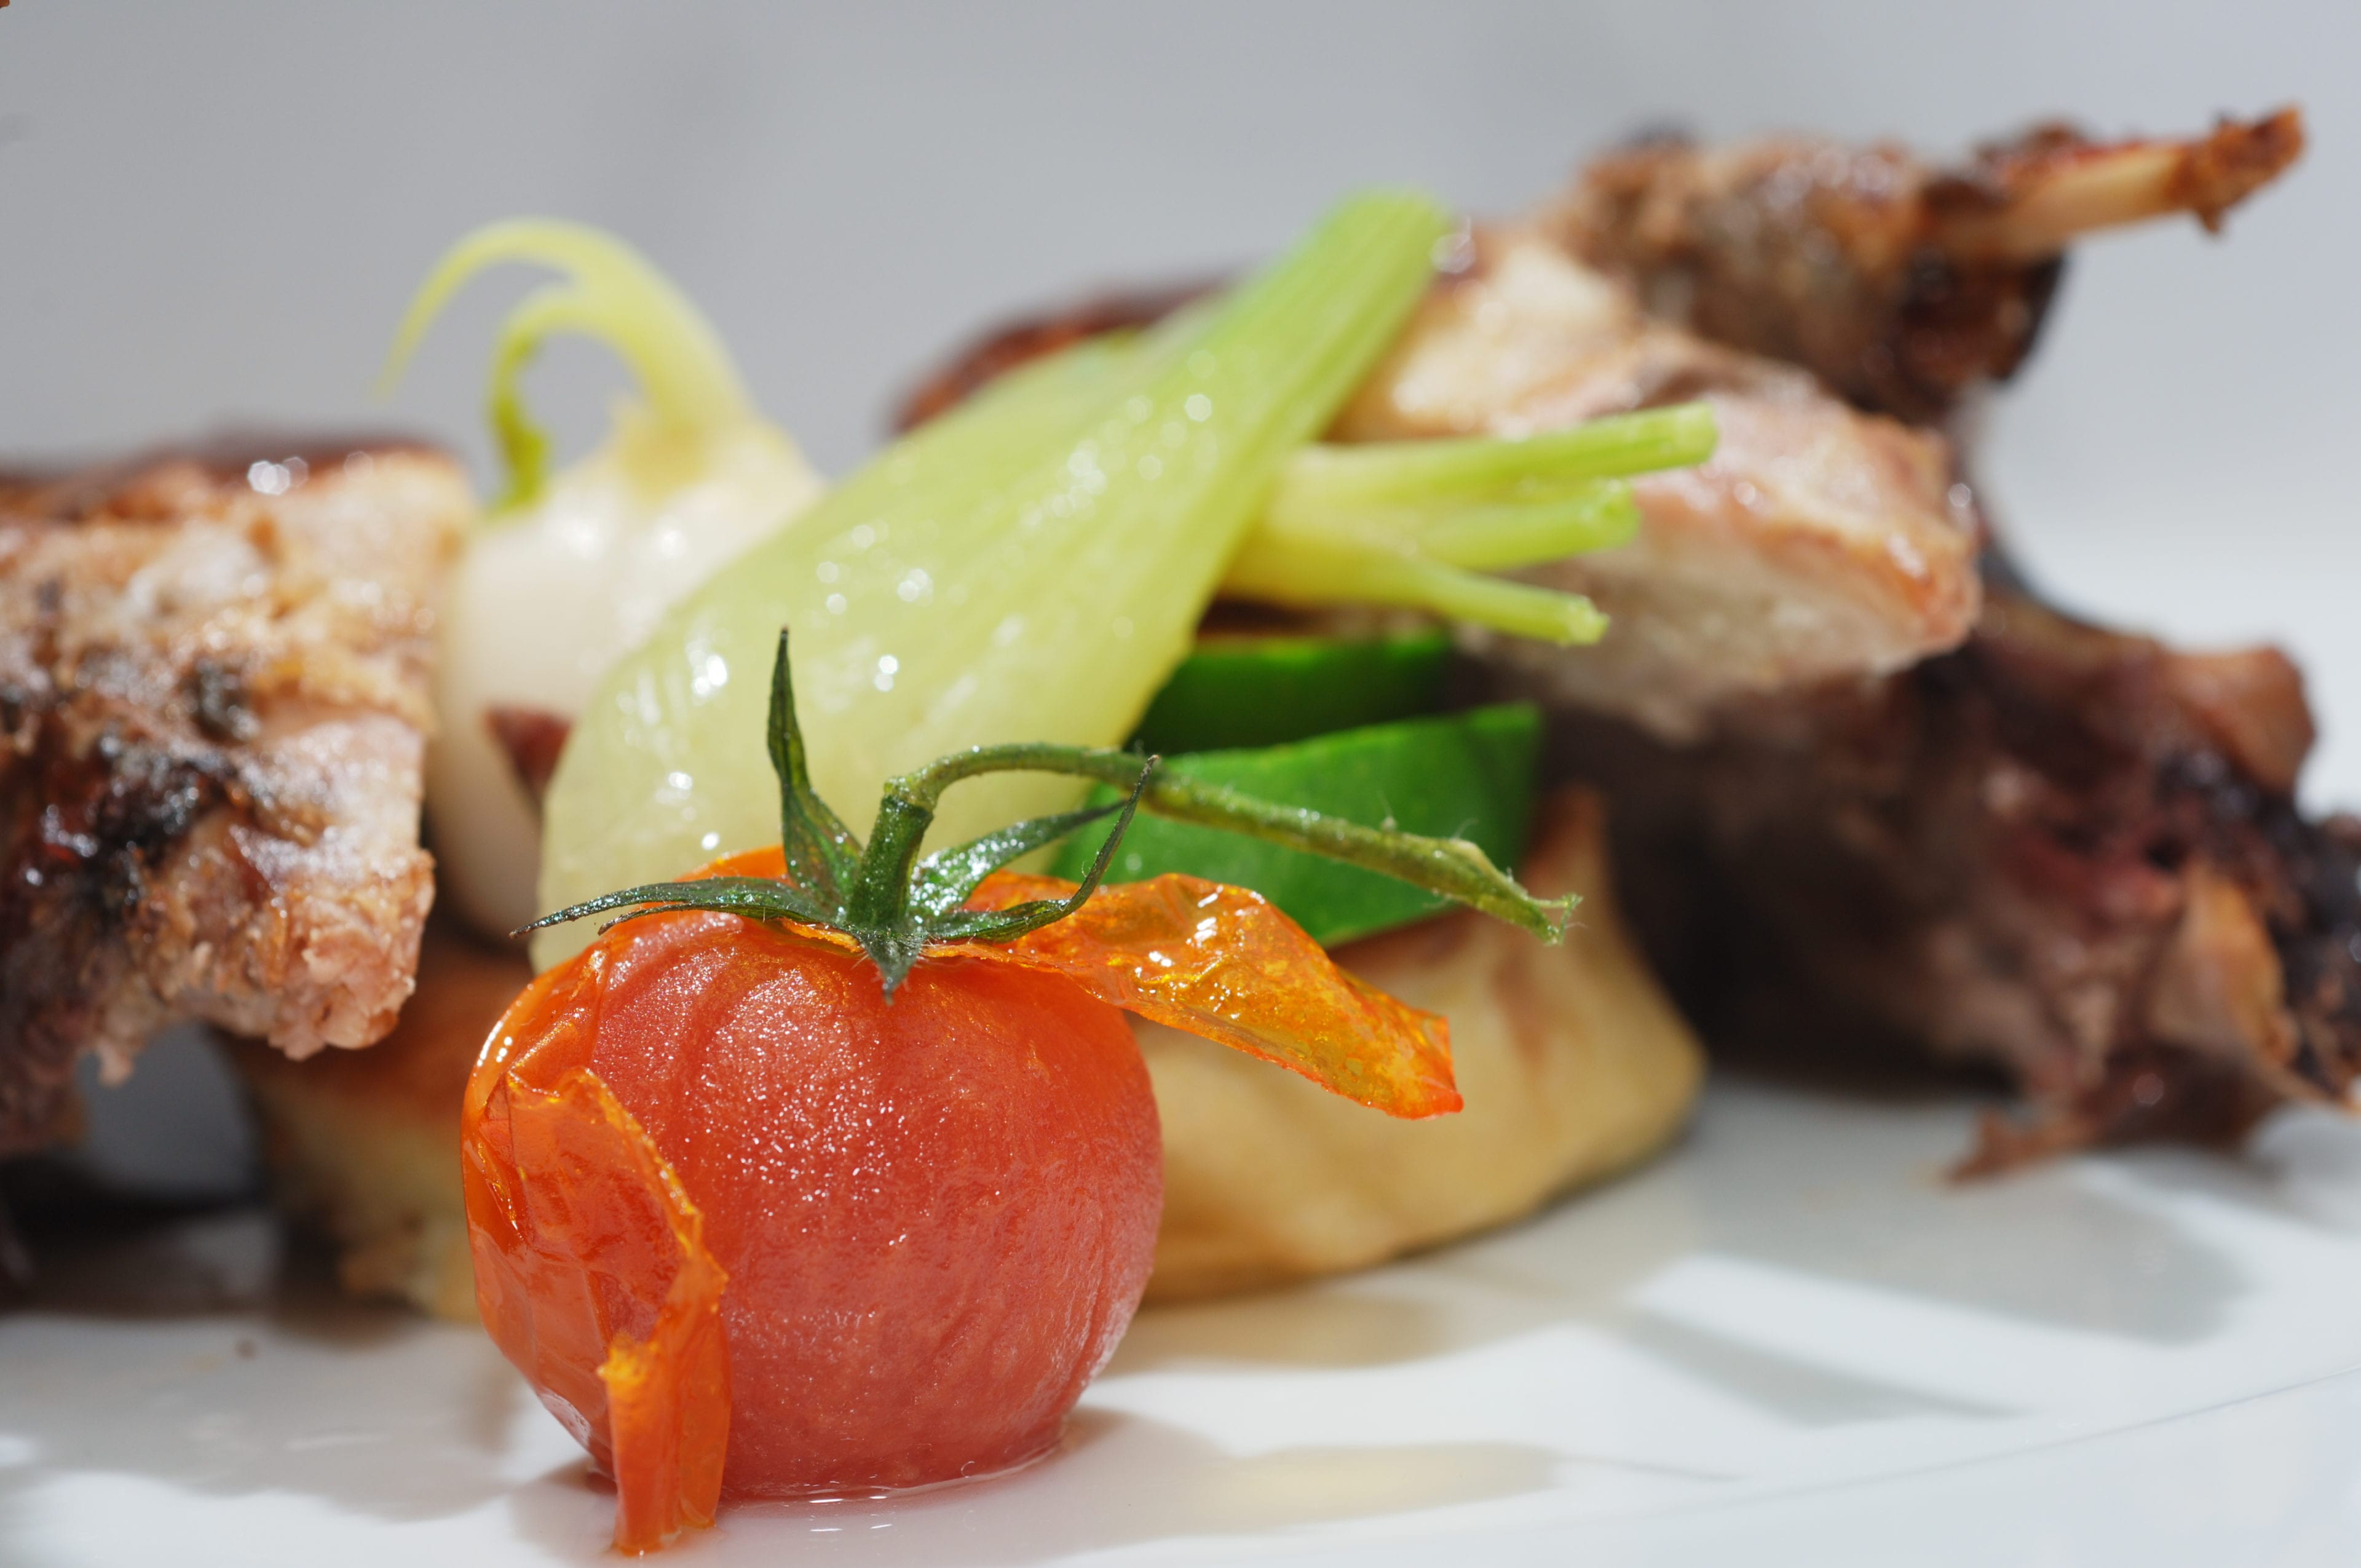 Partridge on a plate with tomato and other vegetables